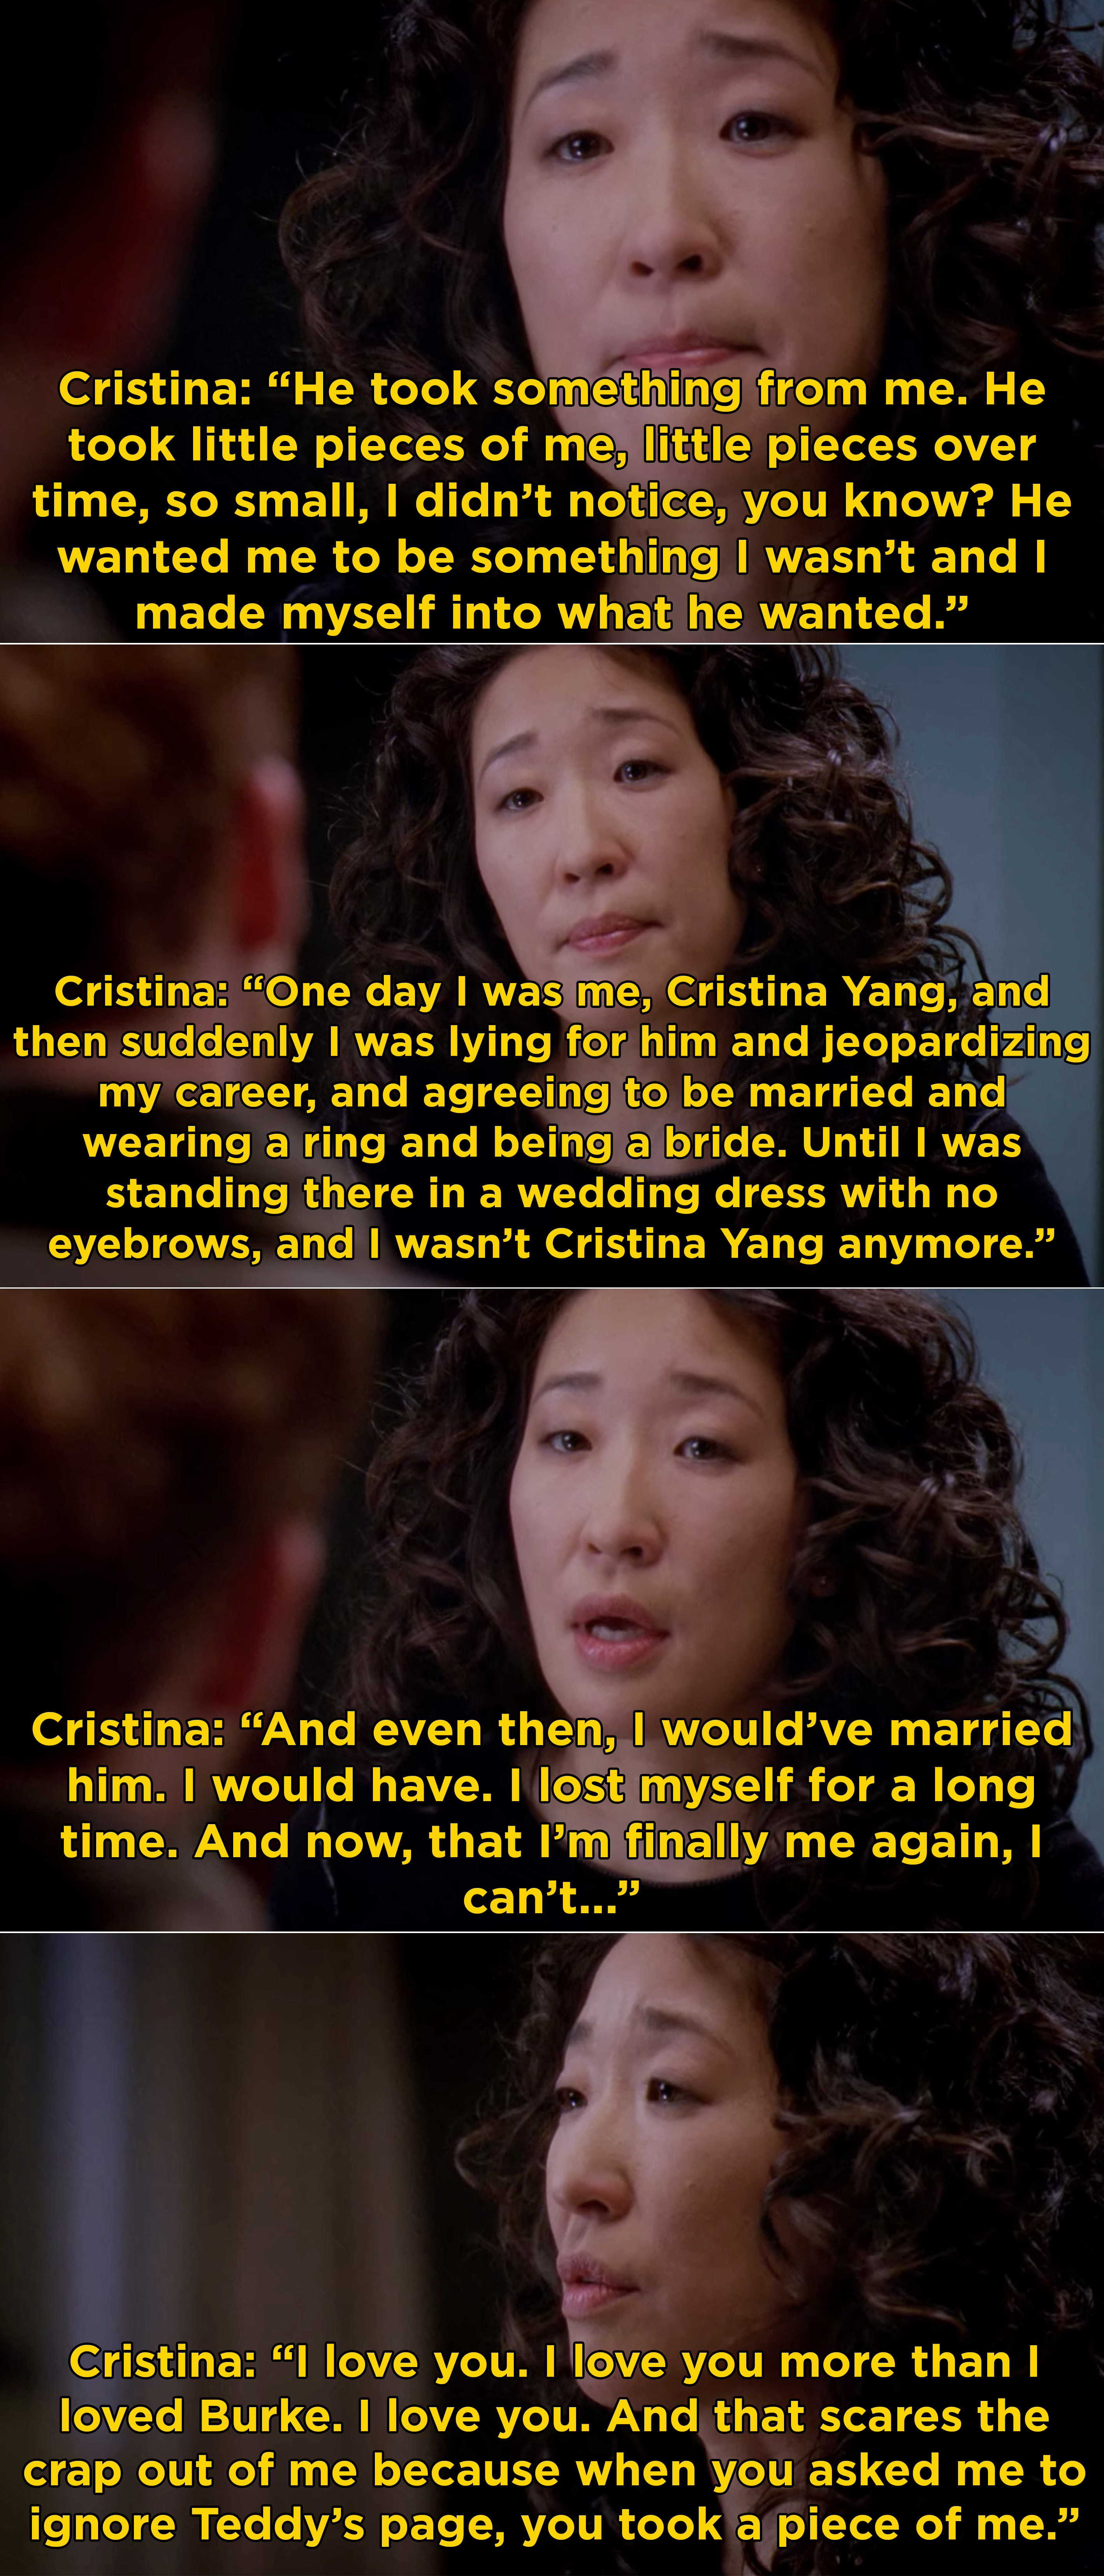 Cristina explaining to Owen that she lost herself while she was with Burke because she wanted to make him happy